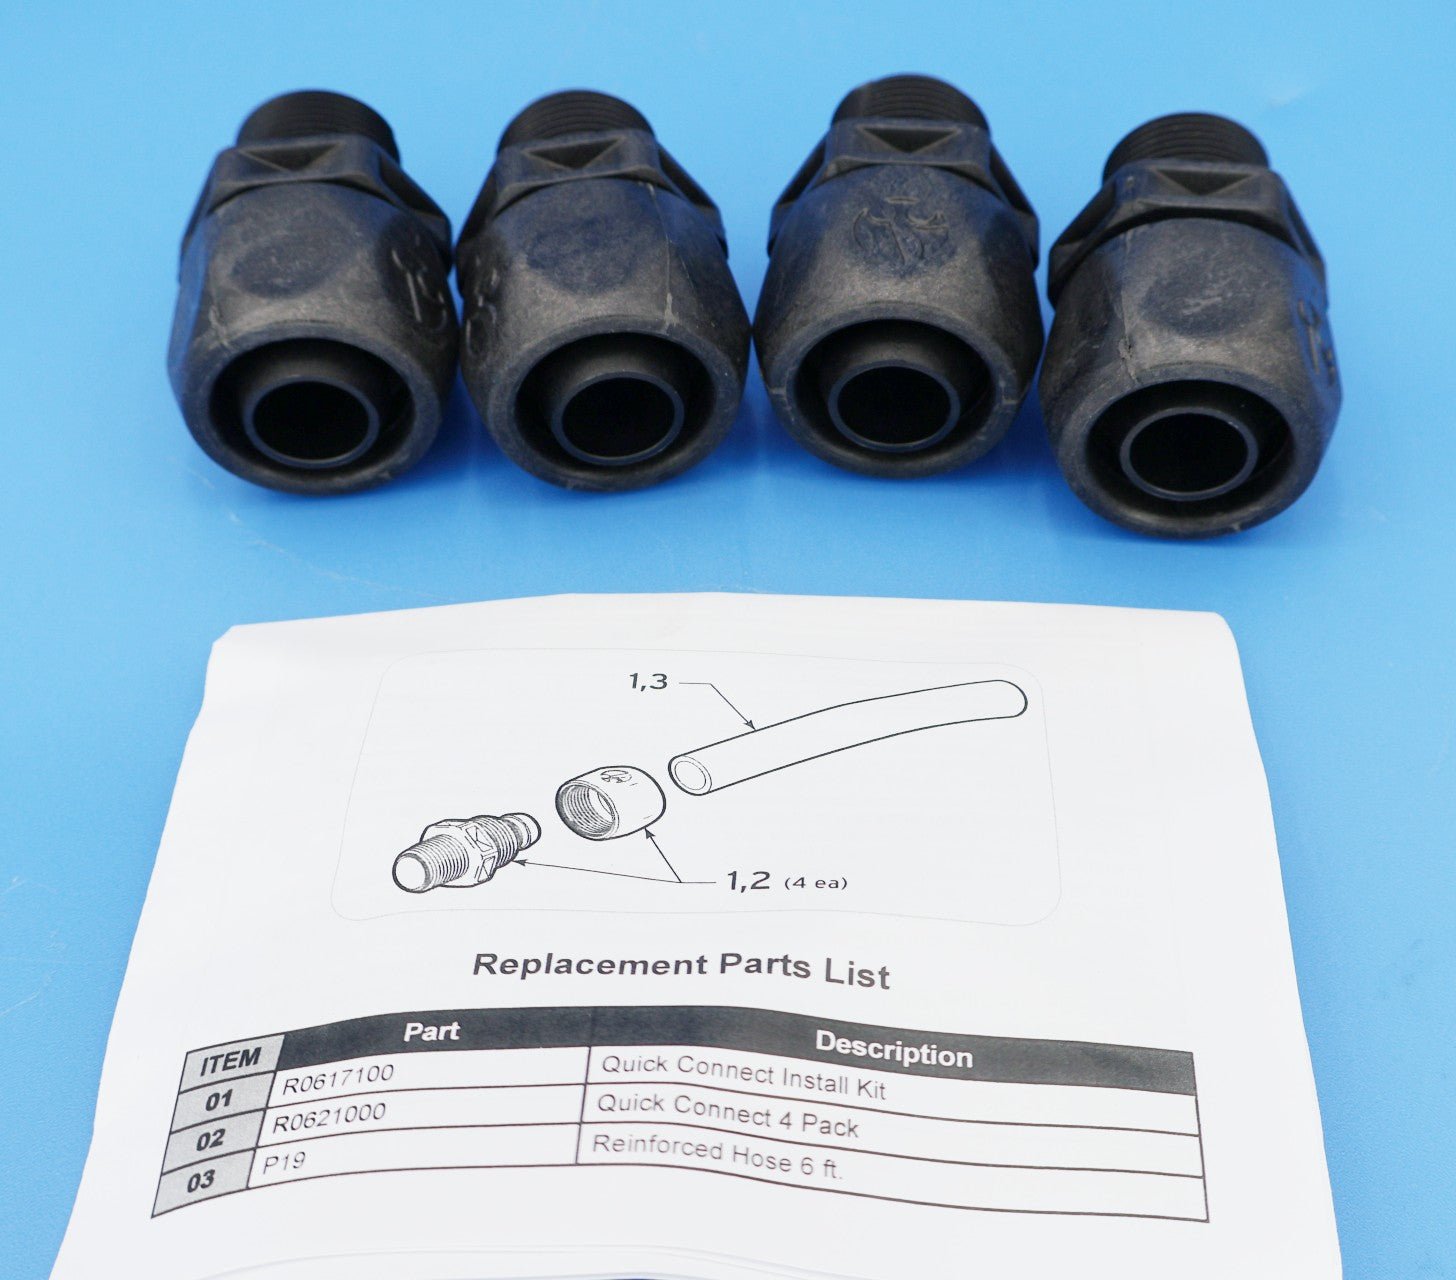 Jandy (Polaris) Booster Pump Black Quick Connect Fittings 4-Pack R0621000 - Pool Pump Parts - img-3